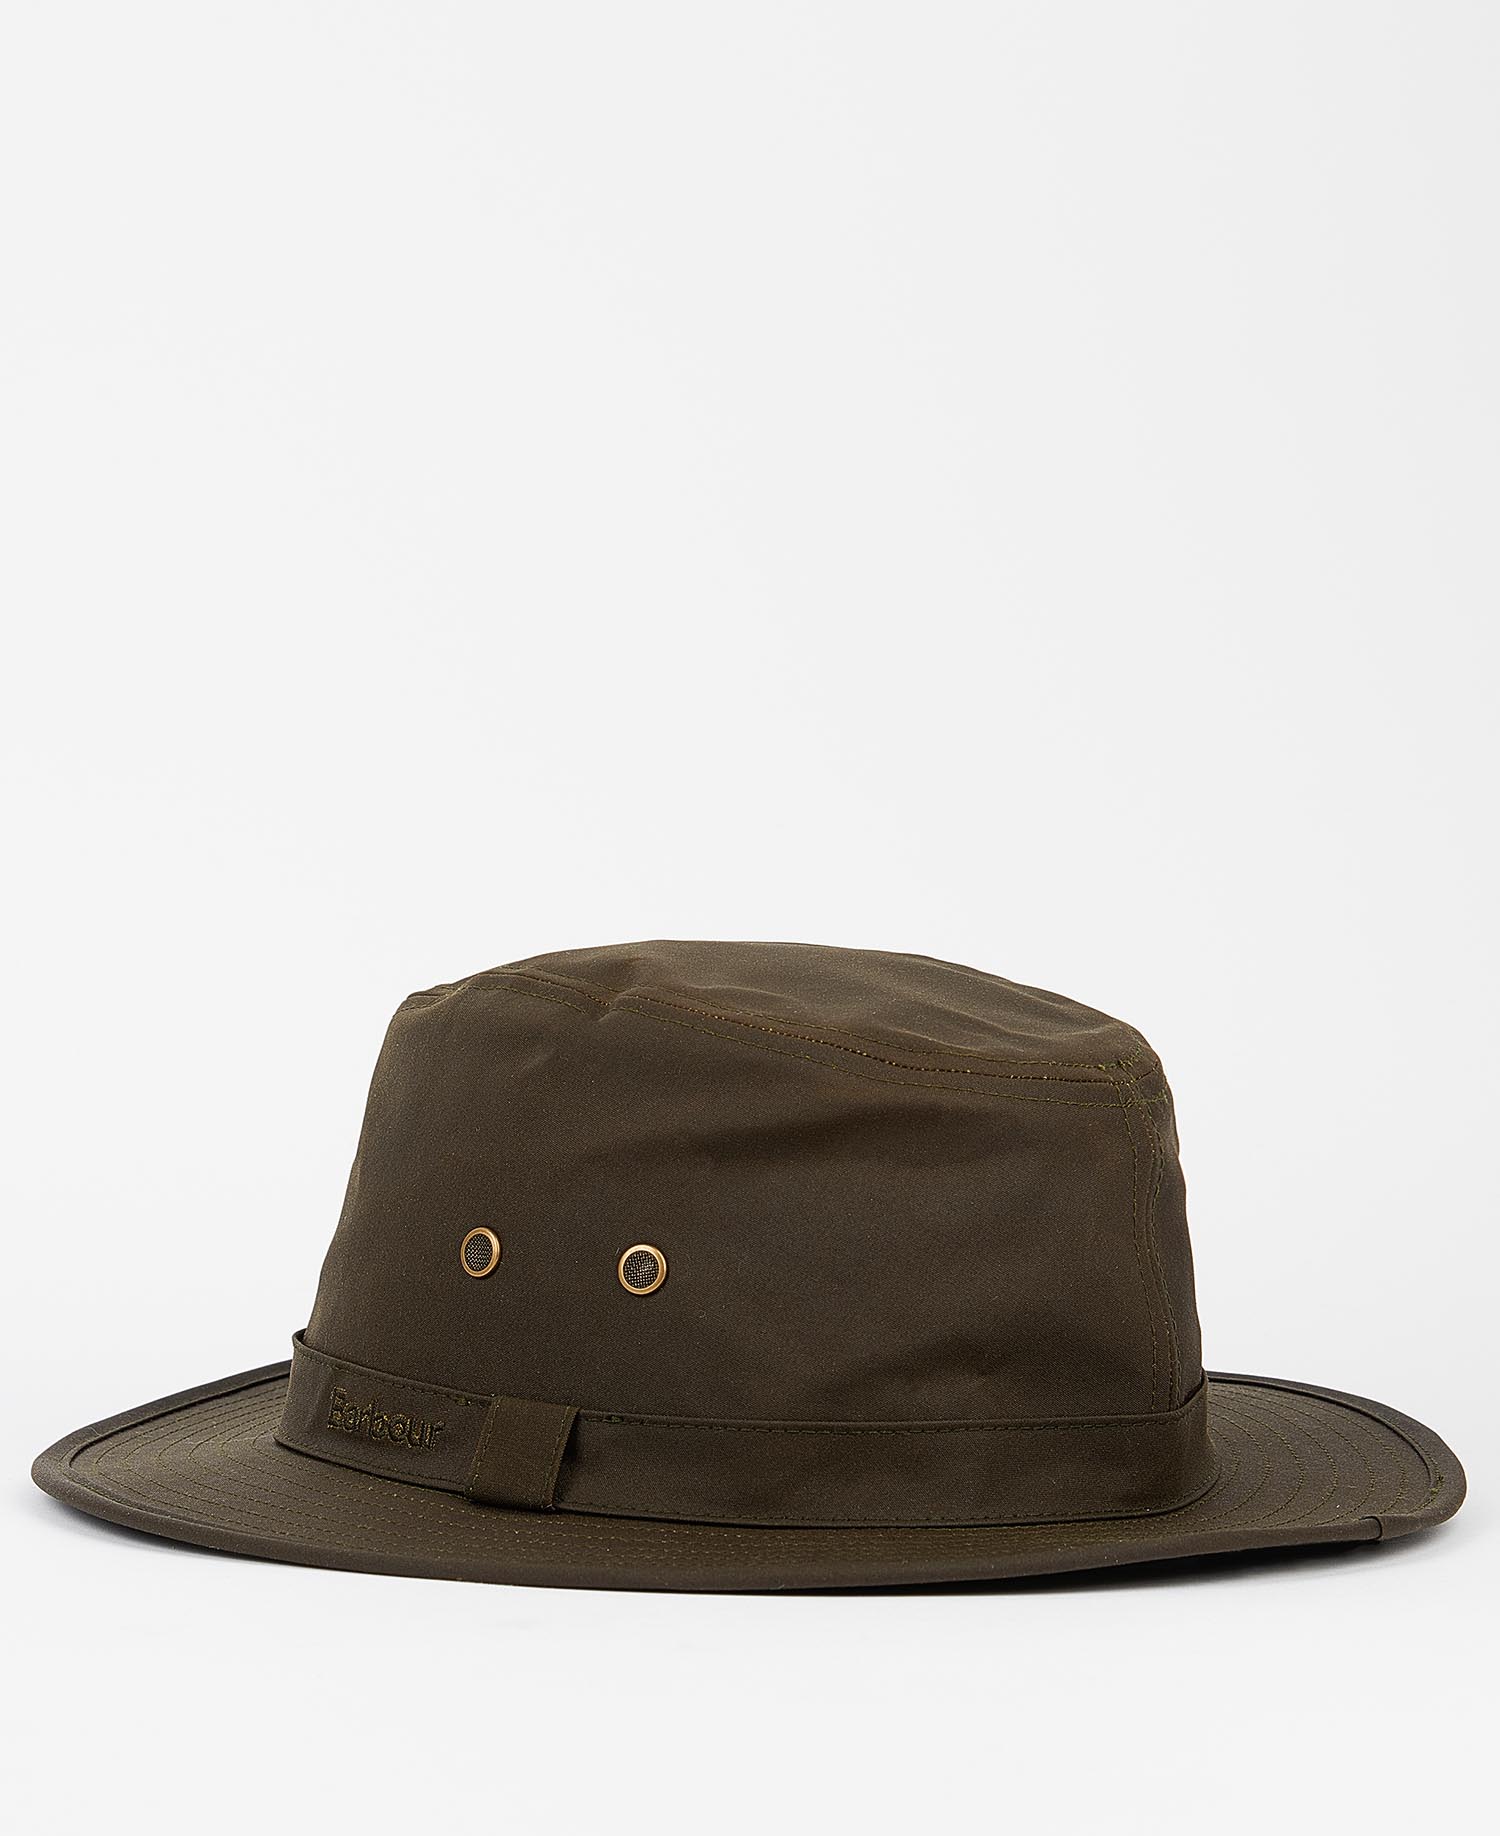 Shop the Barbour Dawson Wax Safari Hat here at Barbour. | Barbour